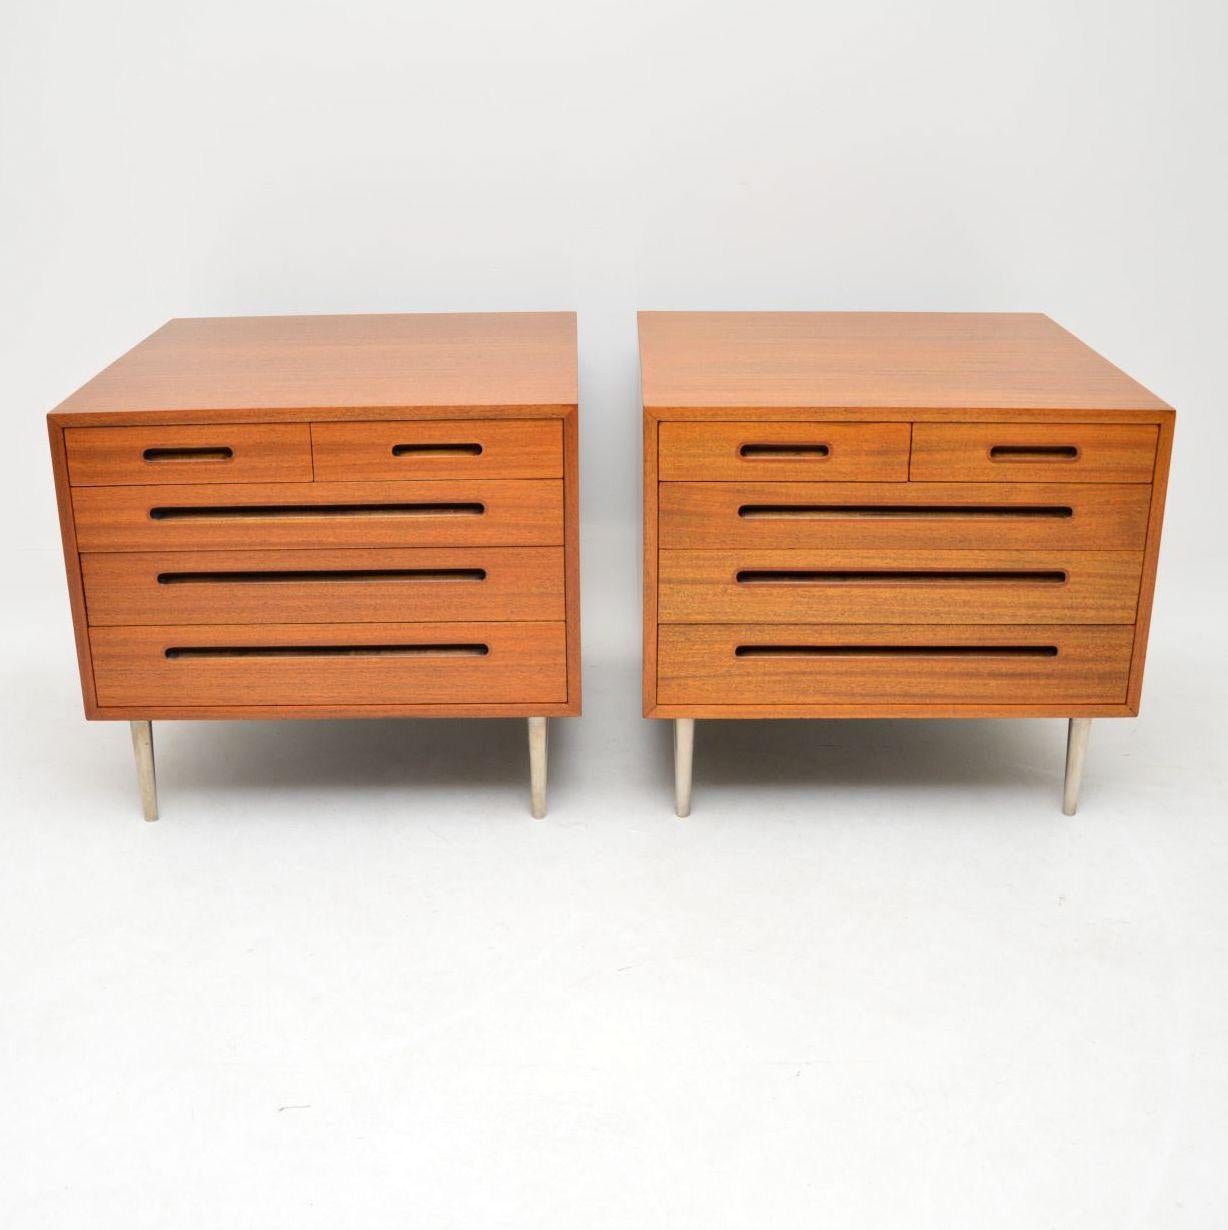 A magnificent pair of vintage mahogany chests, these were made in the USA by Dunbar furniture, they were designed by Edward Wormley. Edward Wormley was one of the leading pioneers of Mid-Century Modern design in America, his designs are highly